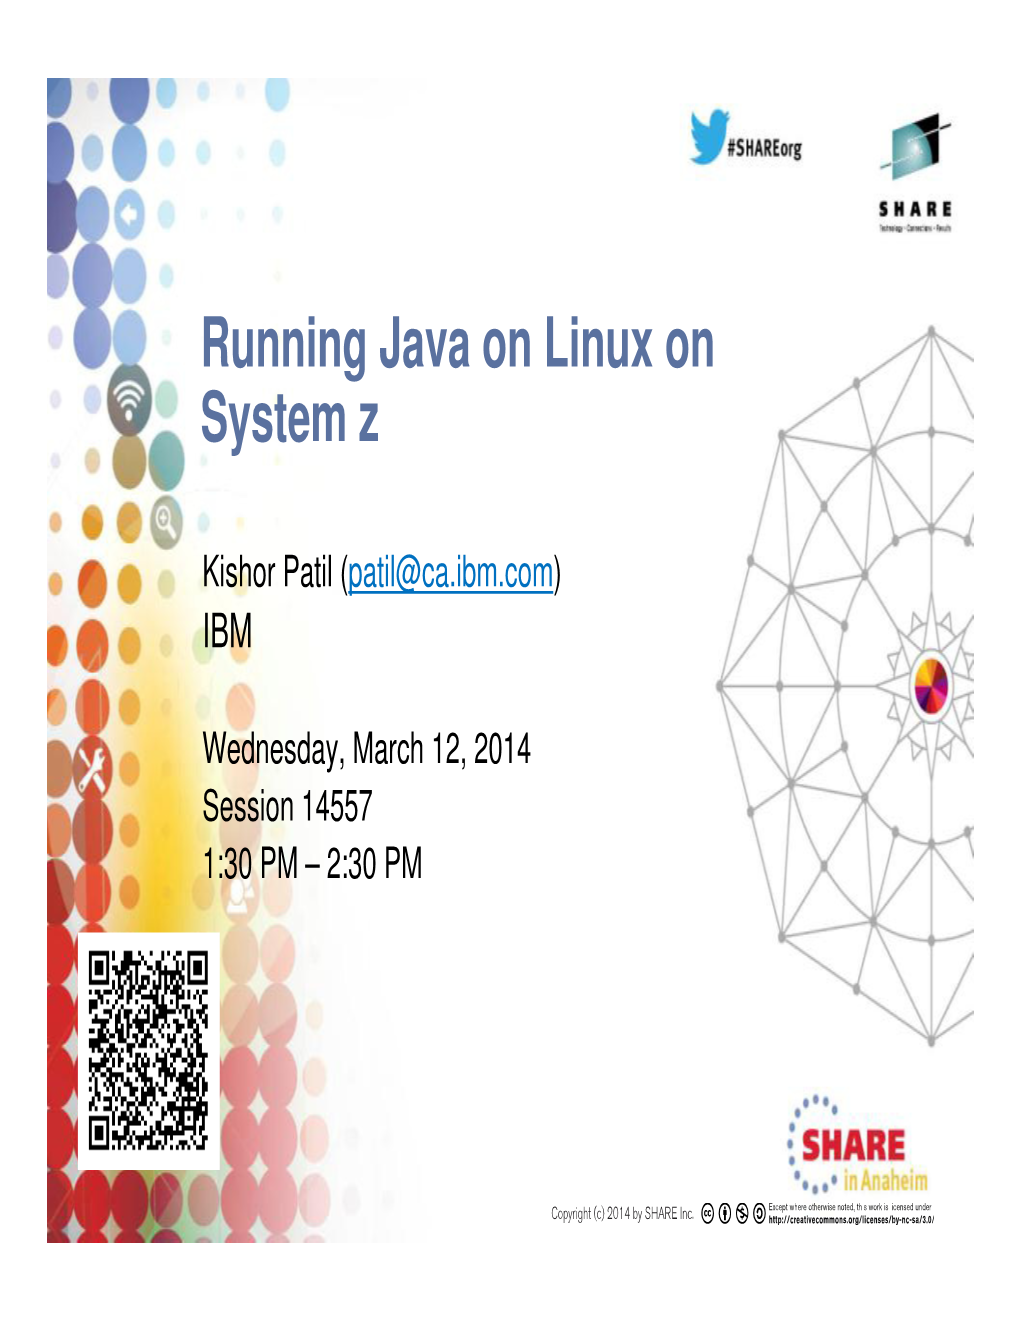 Running Java on Linux on System Z